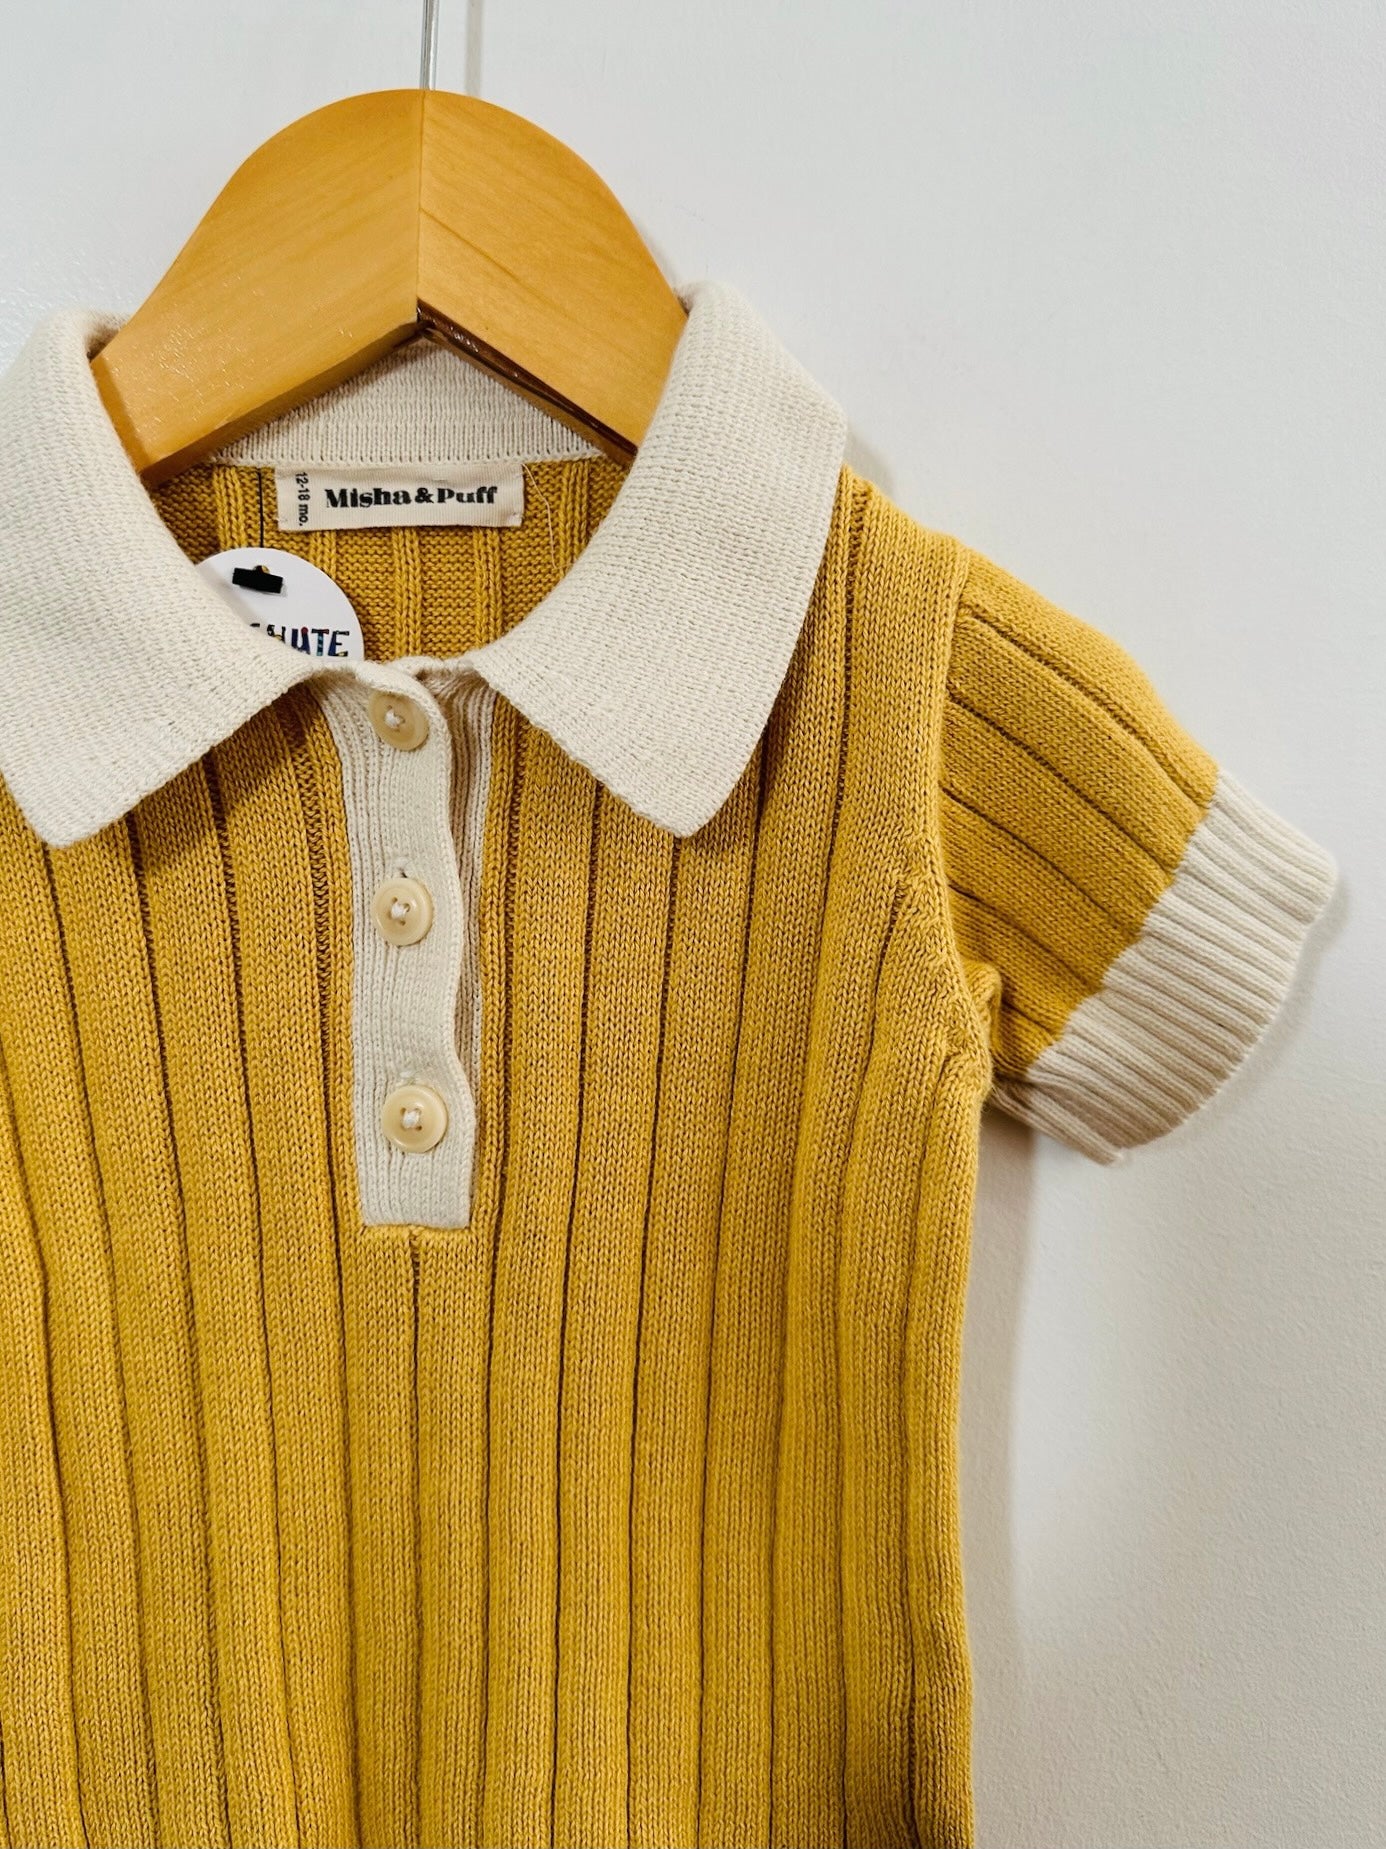 Knit Collared Top / 12-18M